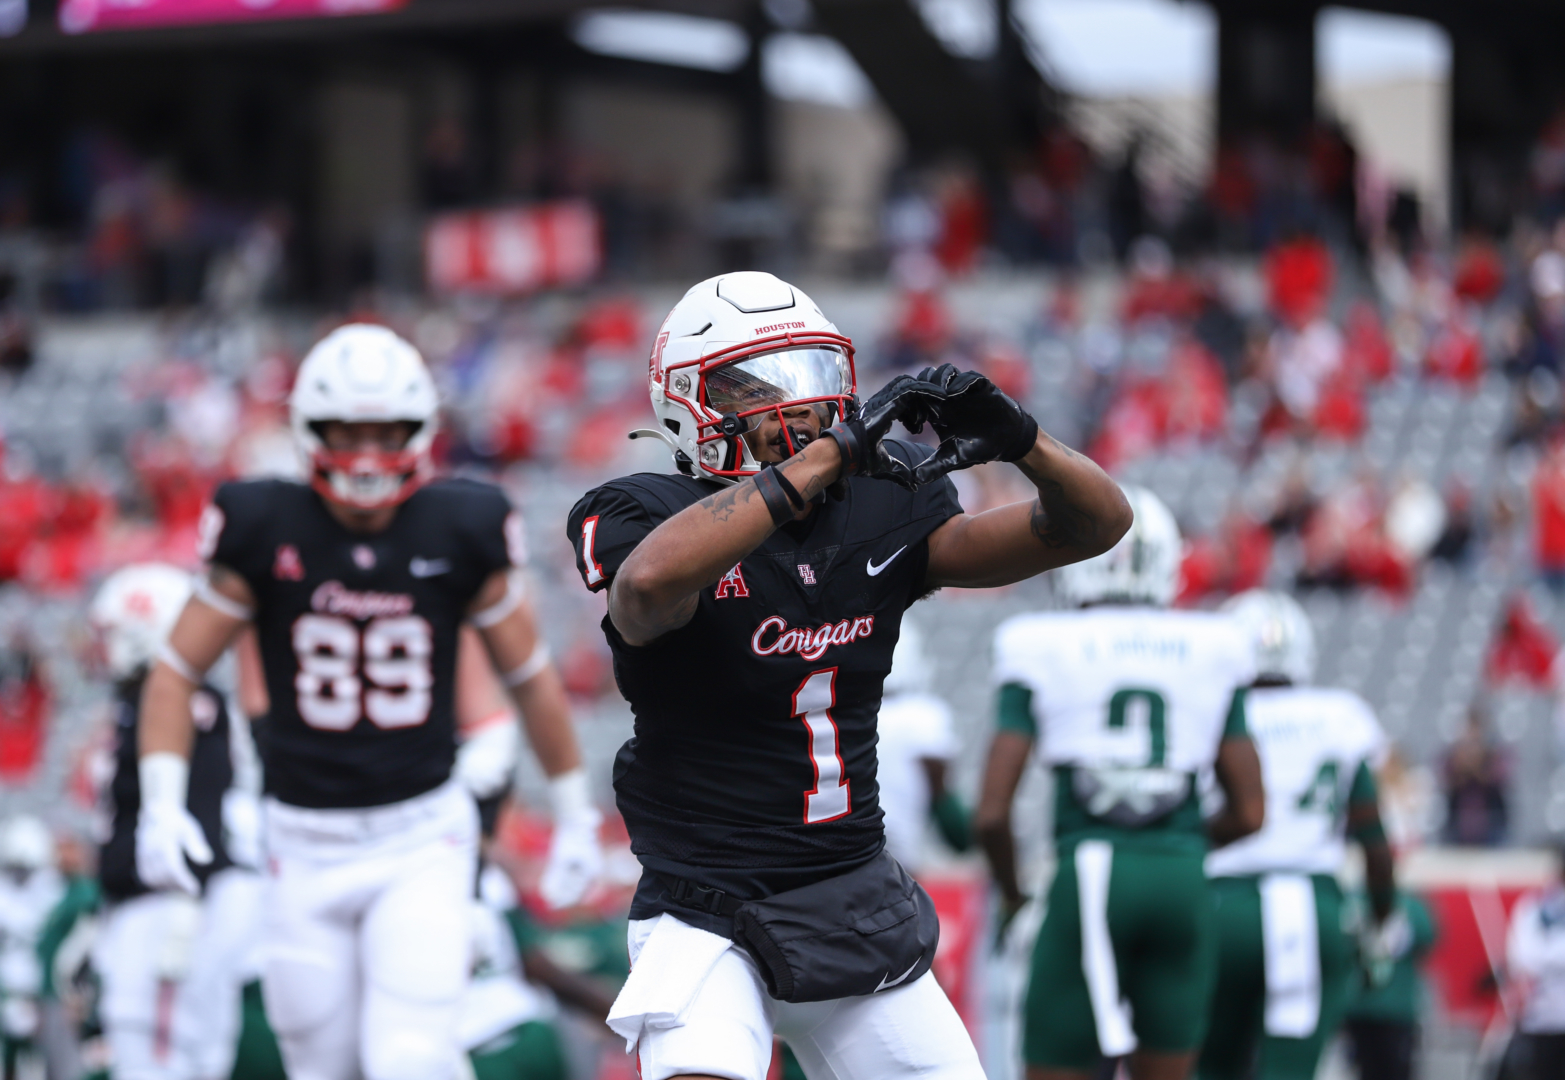 Junior receiver Nathaniel Dell had a good birthday, hauling in two touchdowns in UH football's win over USF on Saturday afternoon at TDECU Stadium. | Sean Thomas/The Cougar